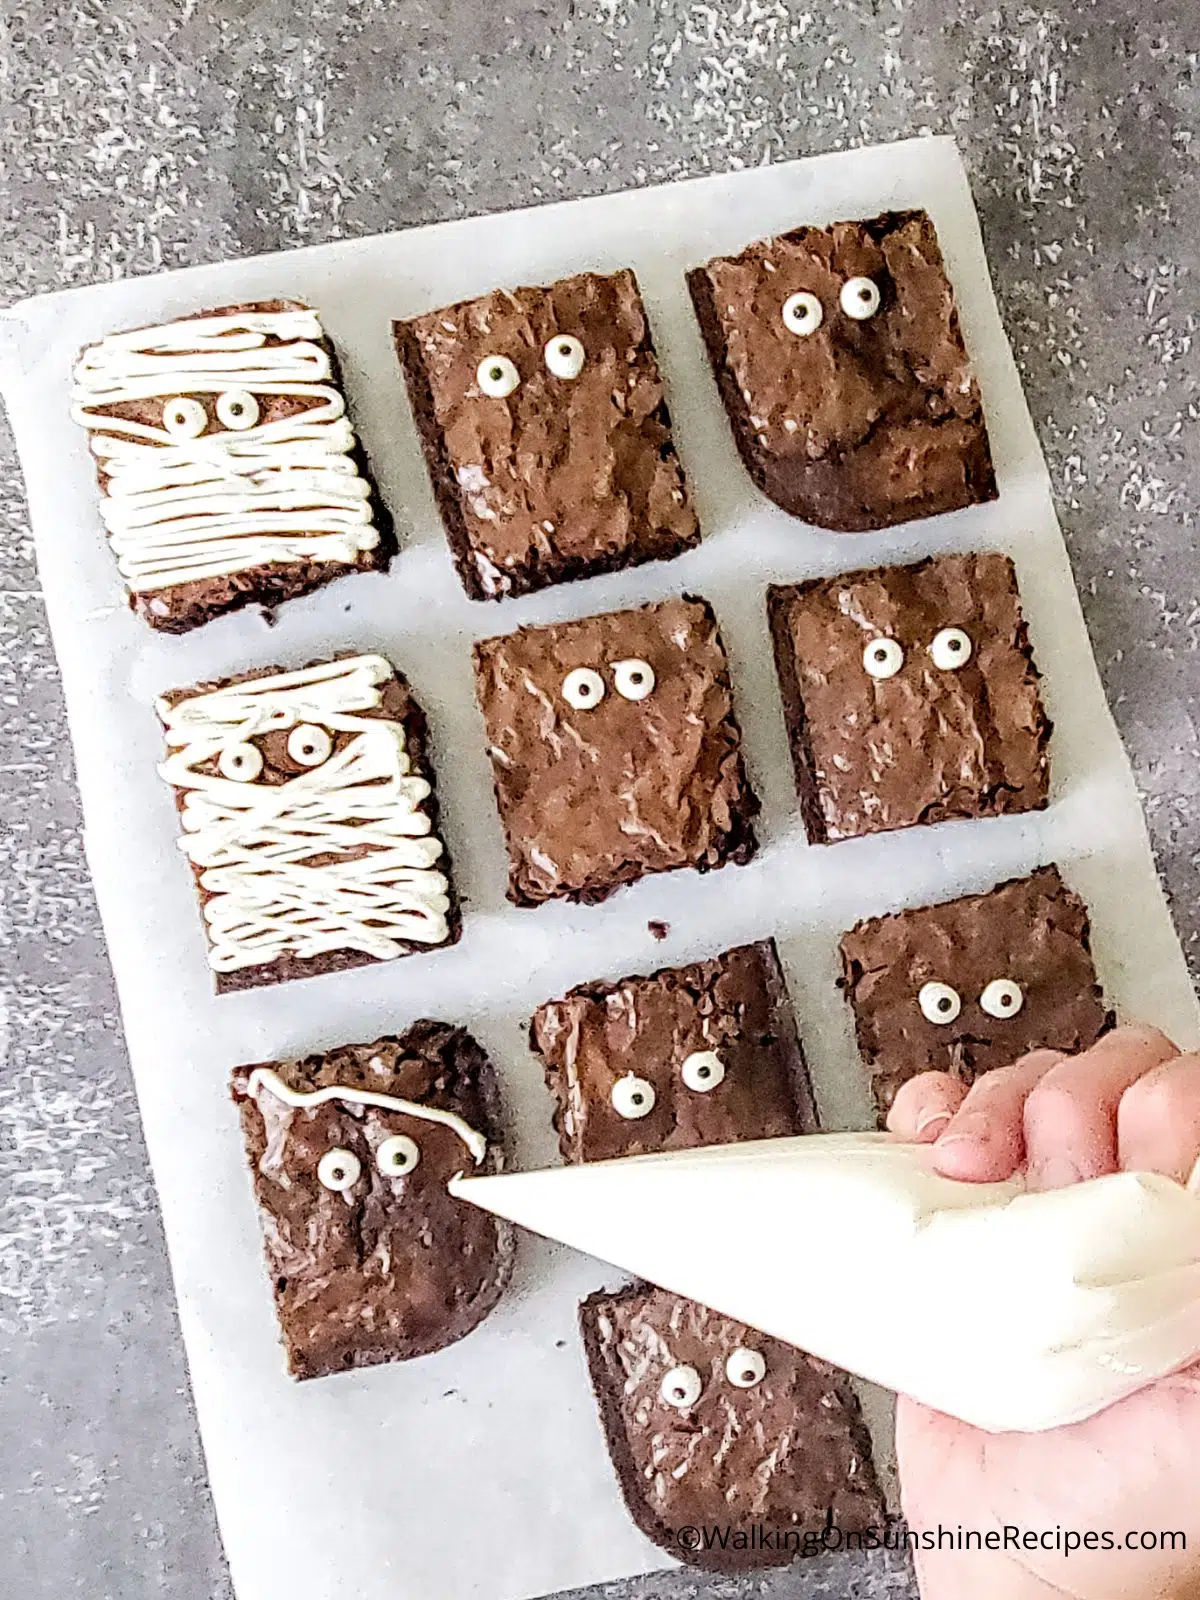 Decorate brownies with vanilla frosting to resemble mummies.